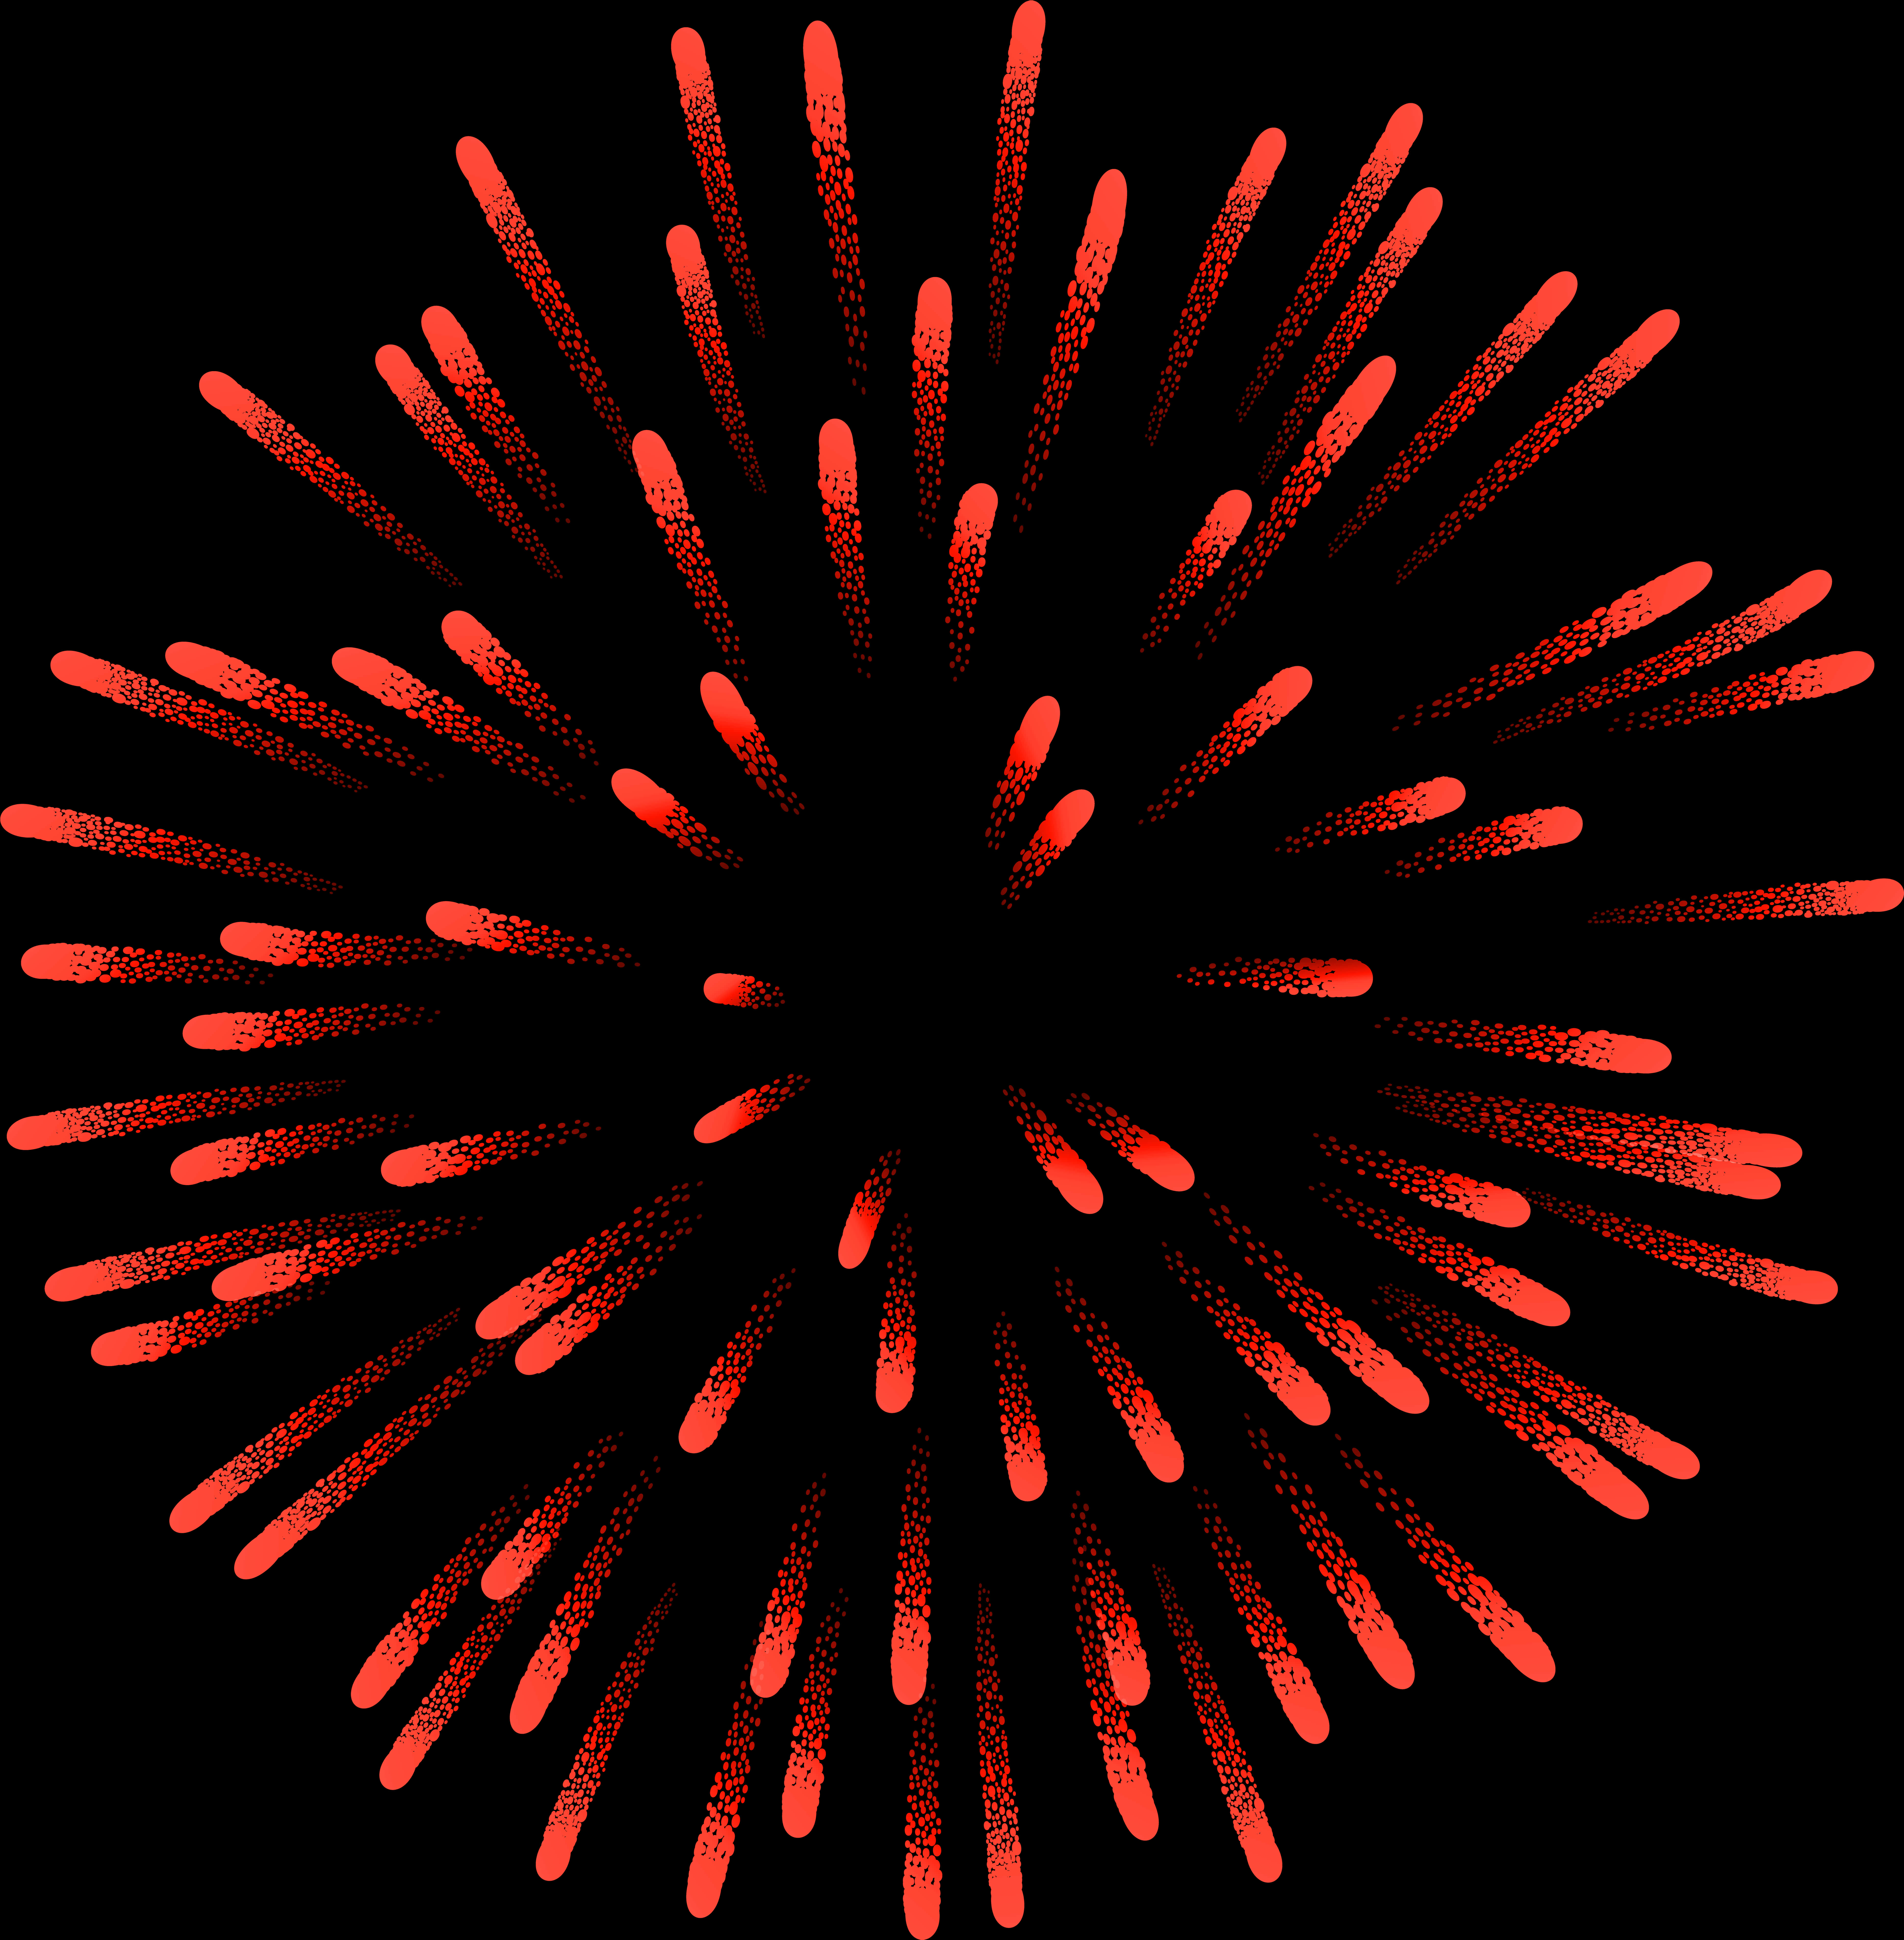 Red Firework Explosion Graphic PNG image